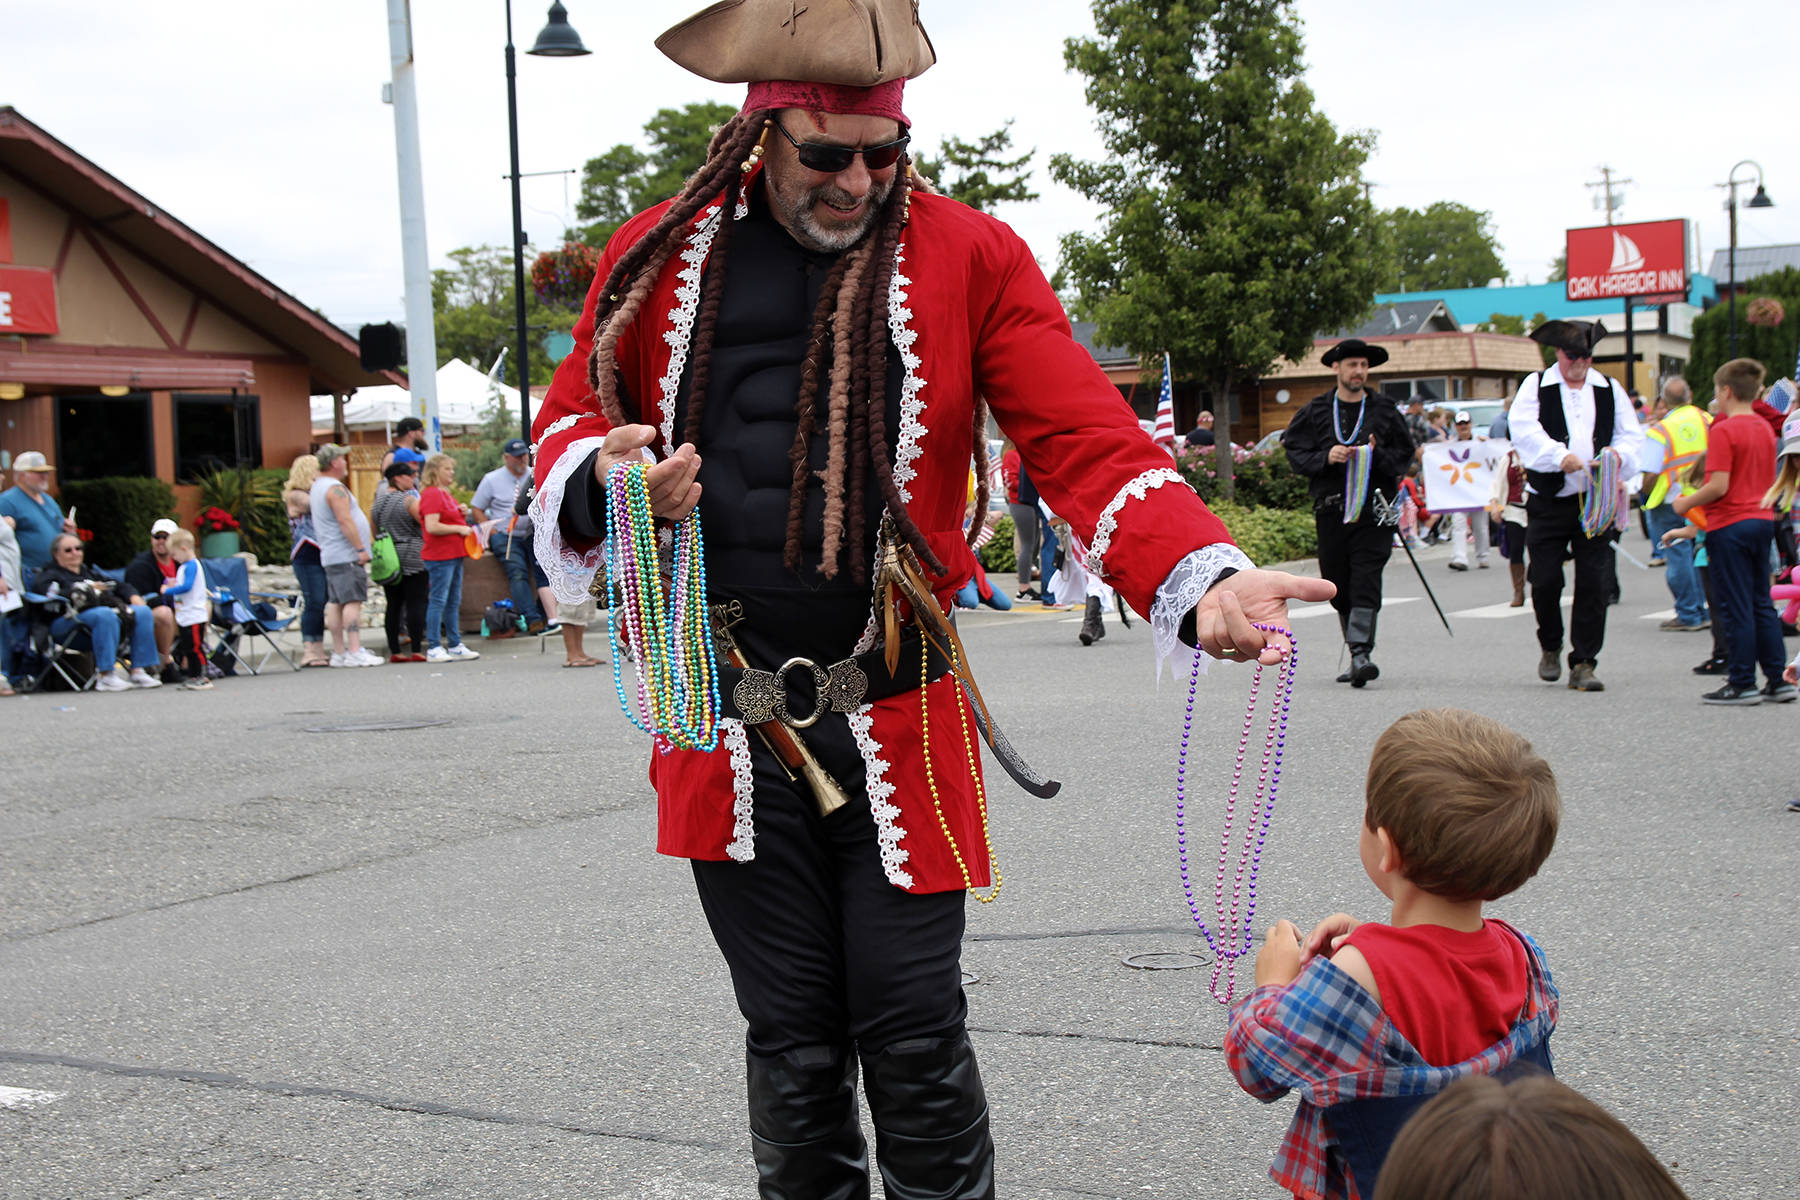 Rob Boyle of the Oak Harbor Yacht Club Buccaneers hands out beads to 3-year-old Finnigan Reilly, who was a fan of the pirate-themed parade float that made loud “booms.”